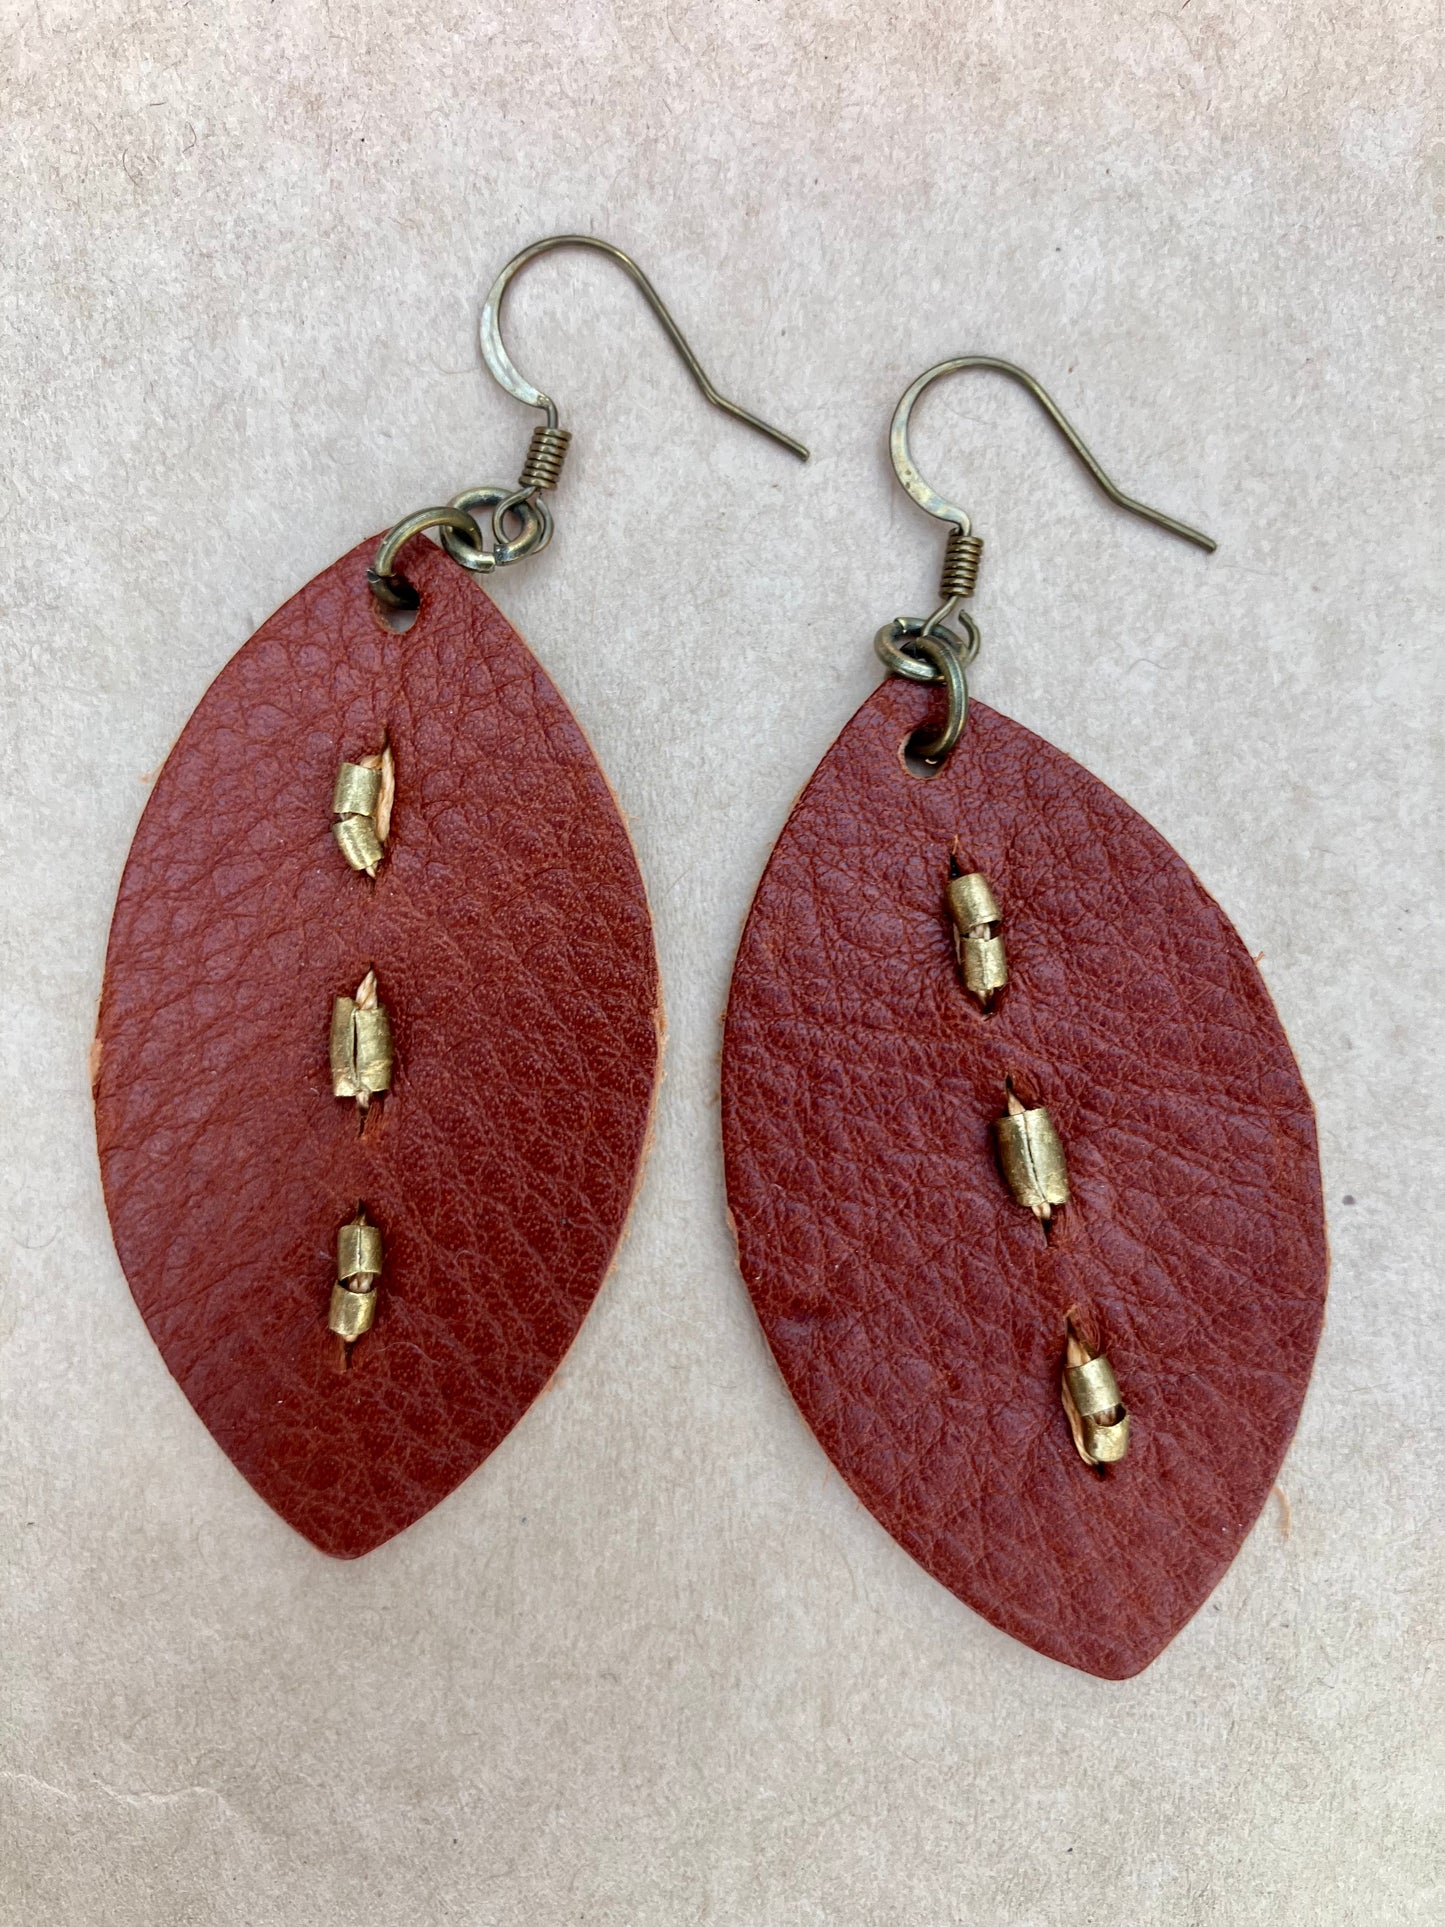 lightweight leather earrings with antique brass; hypoallergenic, nickel free; 3 inch high; handmade.